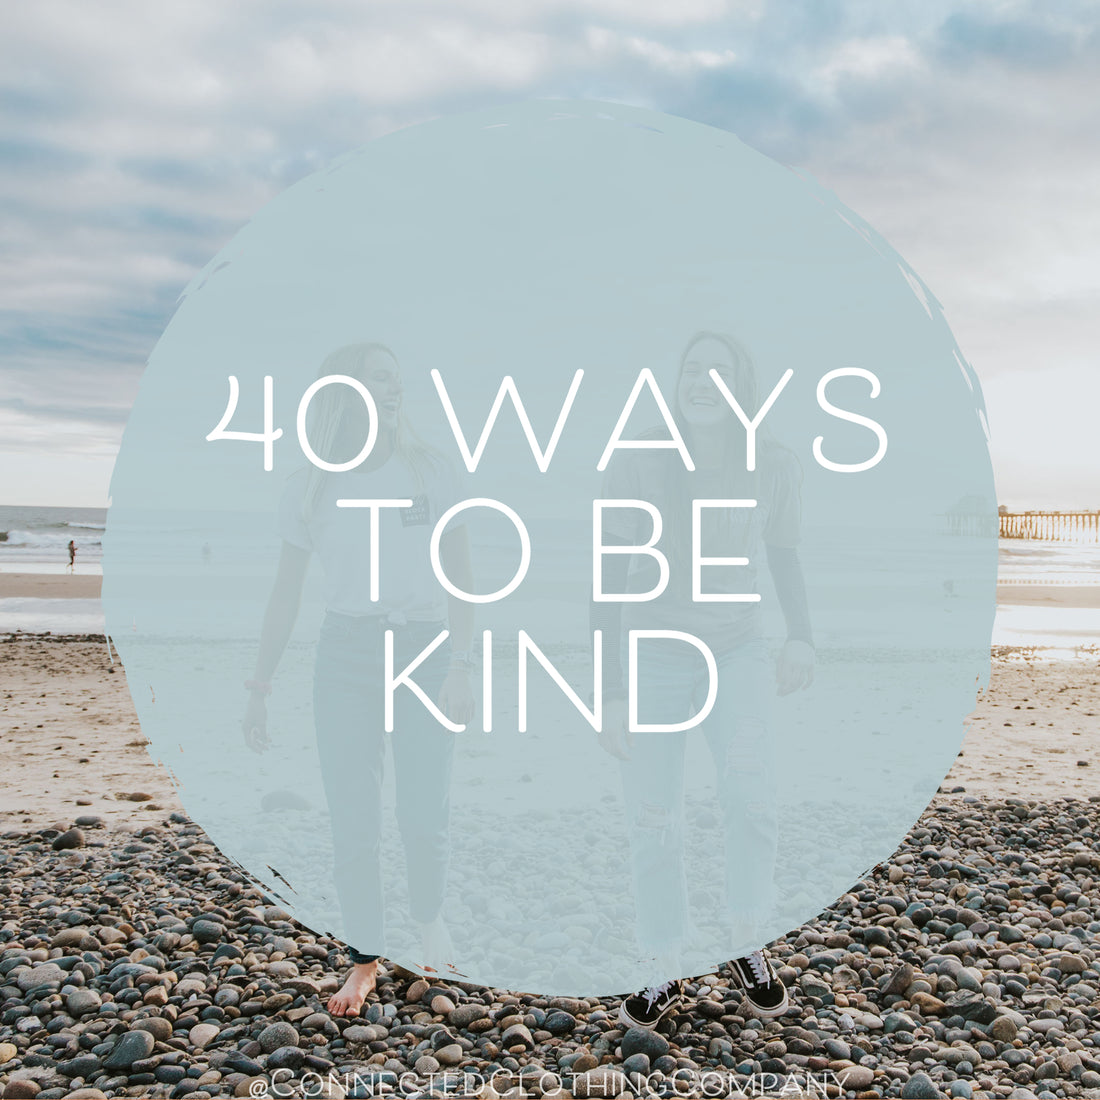 40 Ways To Be Kind - Connected Blog